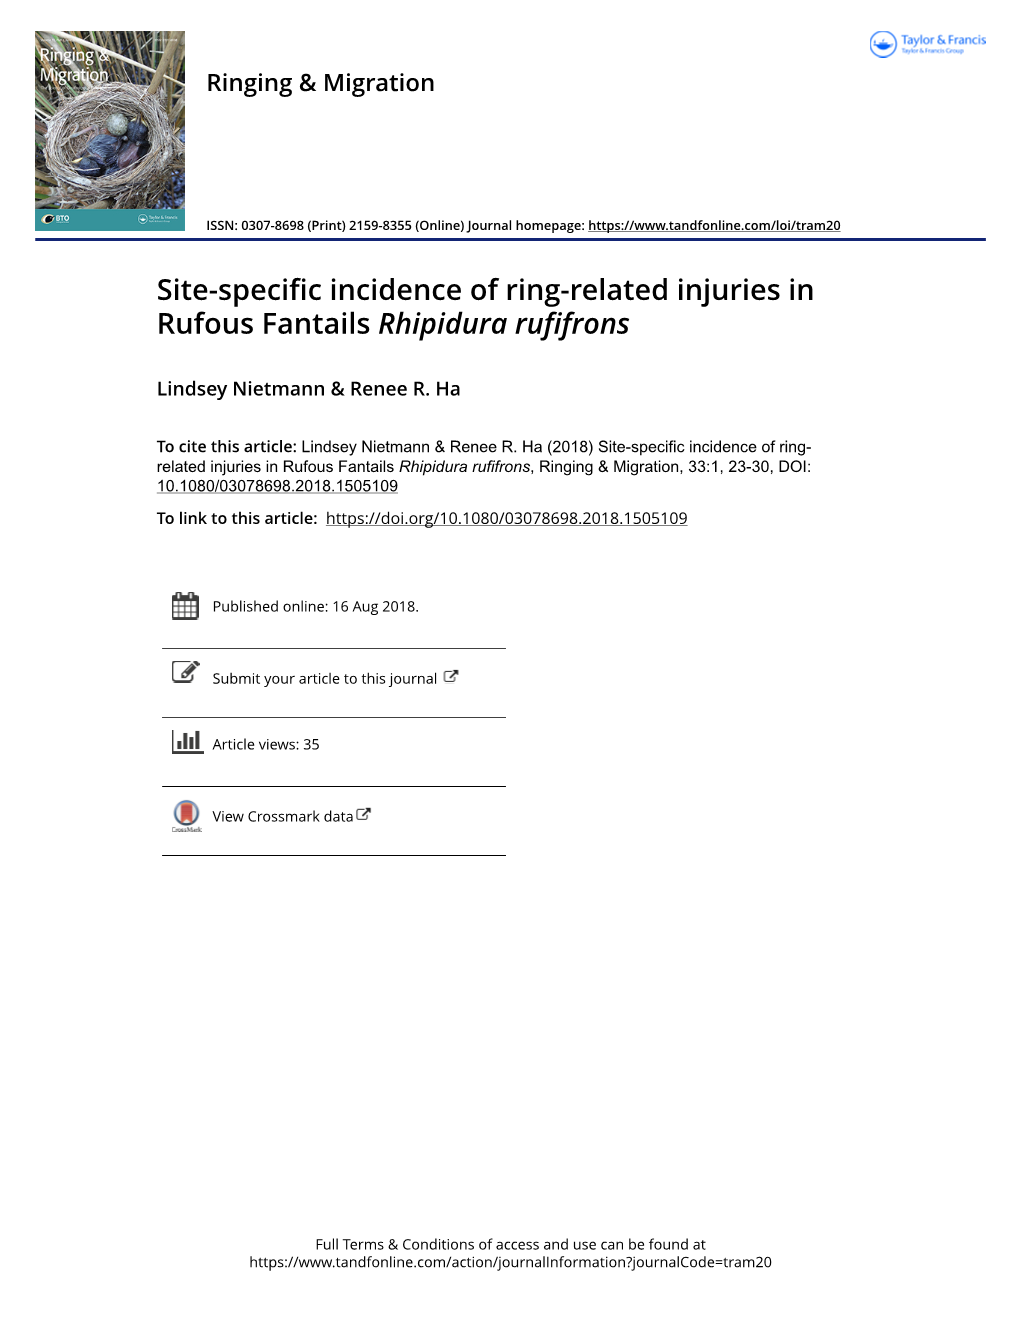 Site-Specific Incidence of Ring-Related Injuries in Rufous Fantails Rhipidura Rufifrons